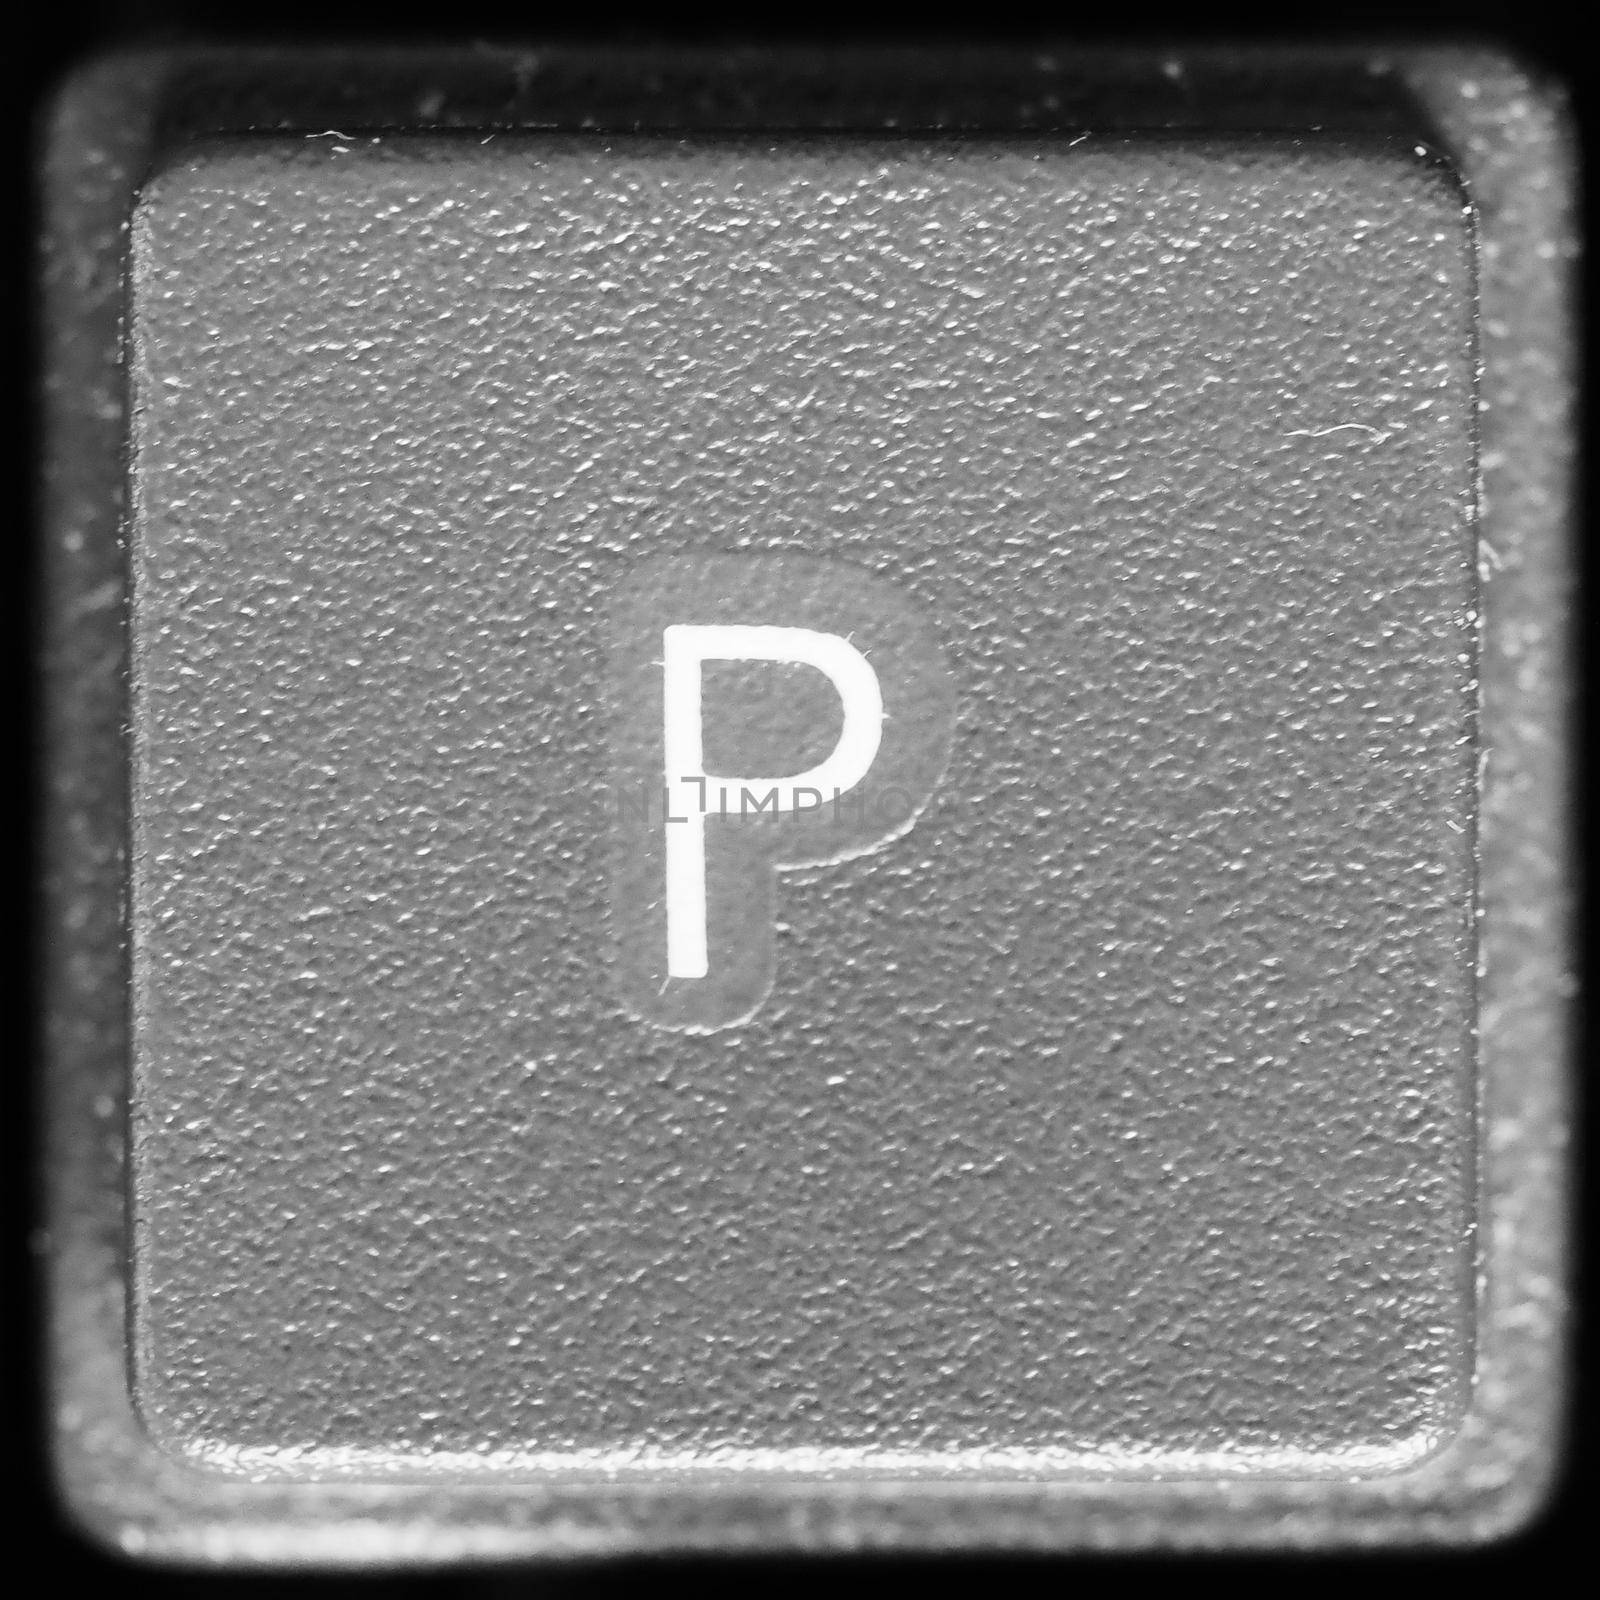 Letter P on computer keyboard by claudiodivizia